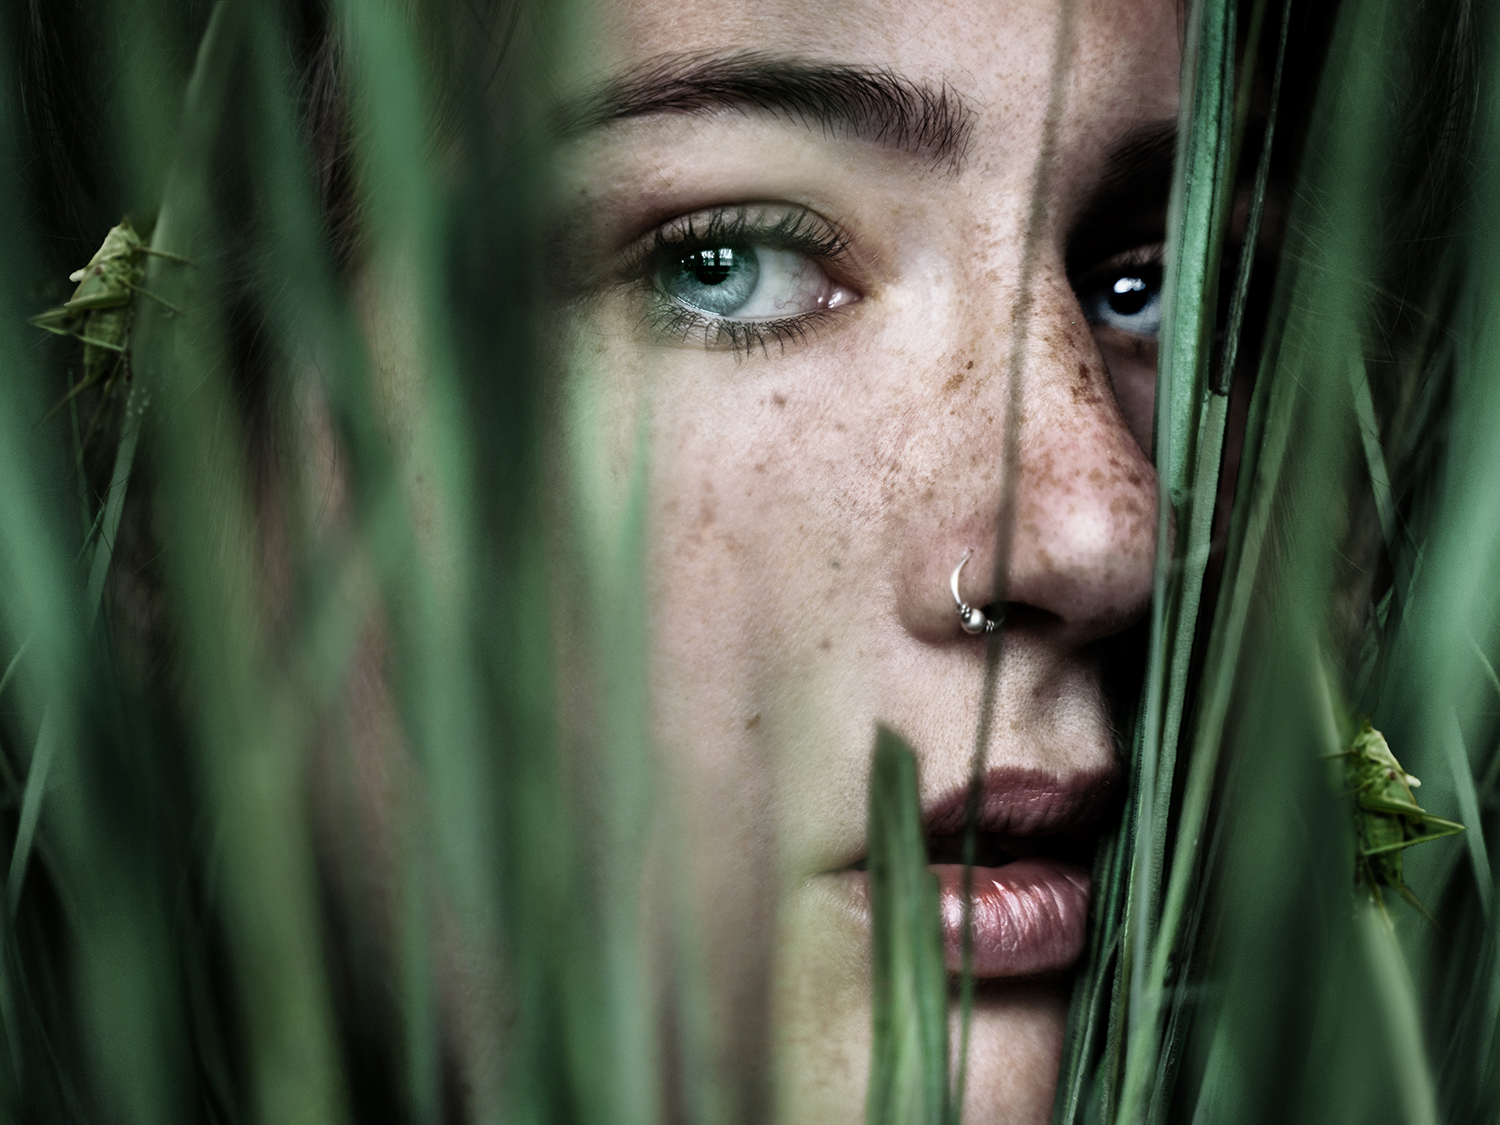 A beautiful close-up self-portrait of a woman with freckles. Her face is surrounded by grass and some hidden grasshoppers.